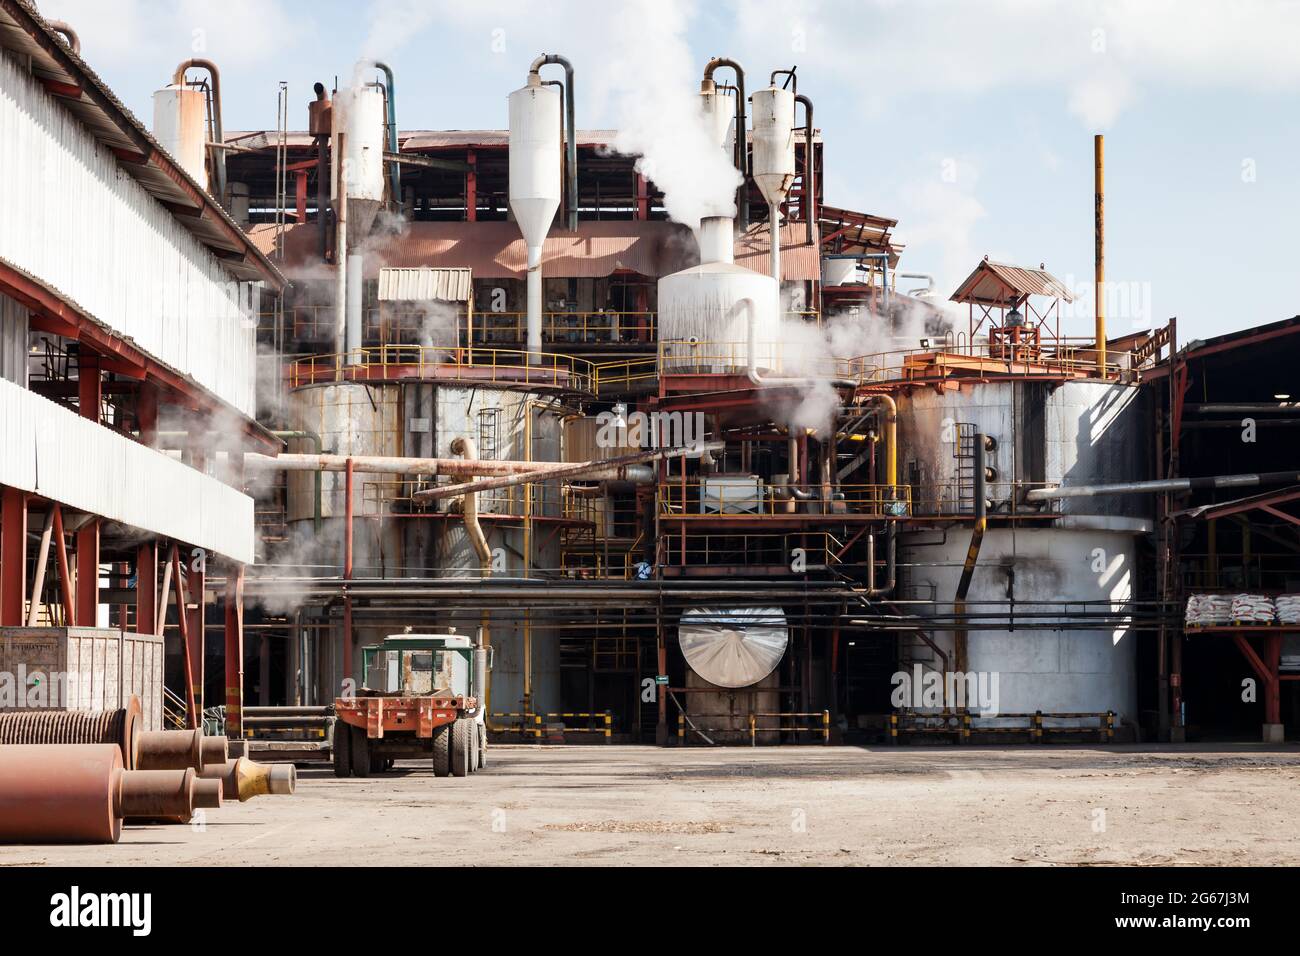 External view of a sugar refinery with piping, cooking vats and vapour Stock Photo